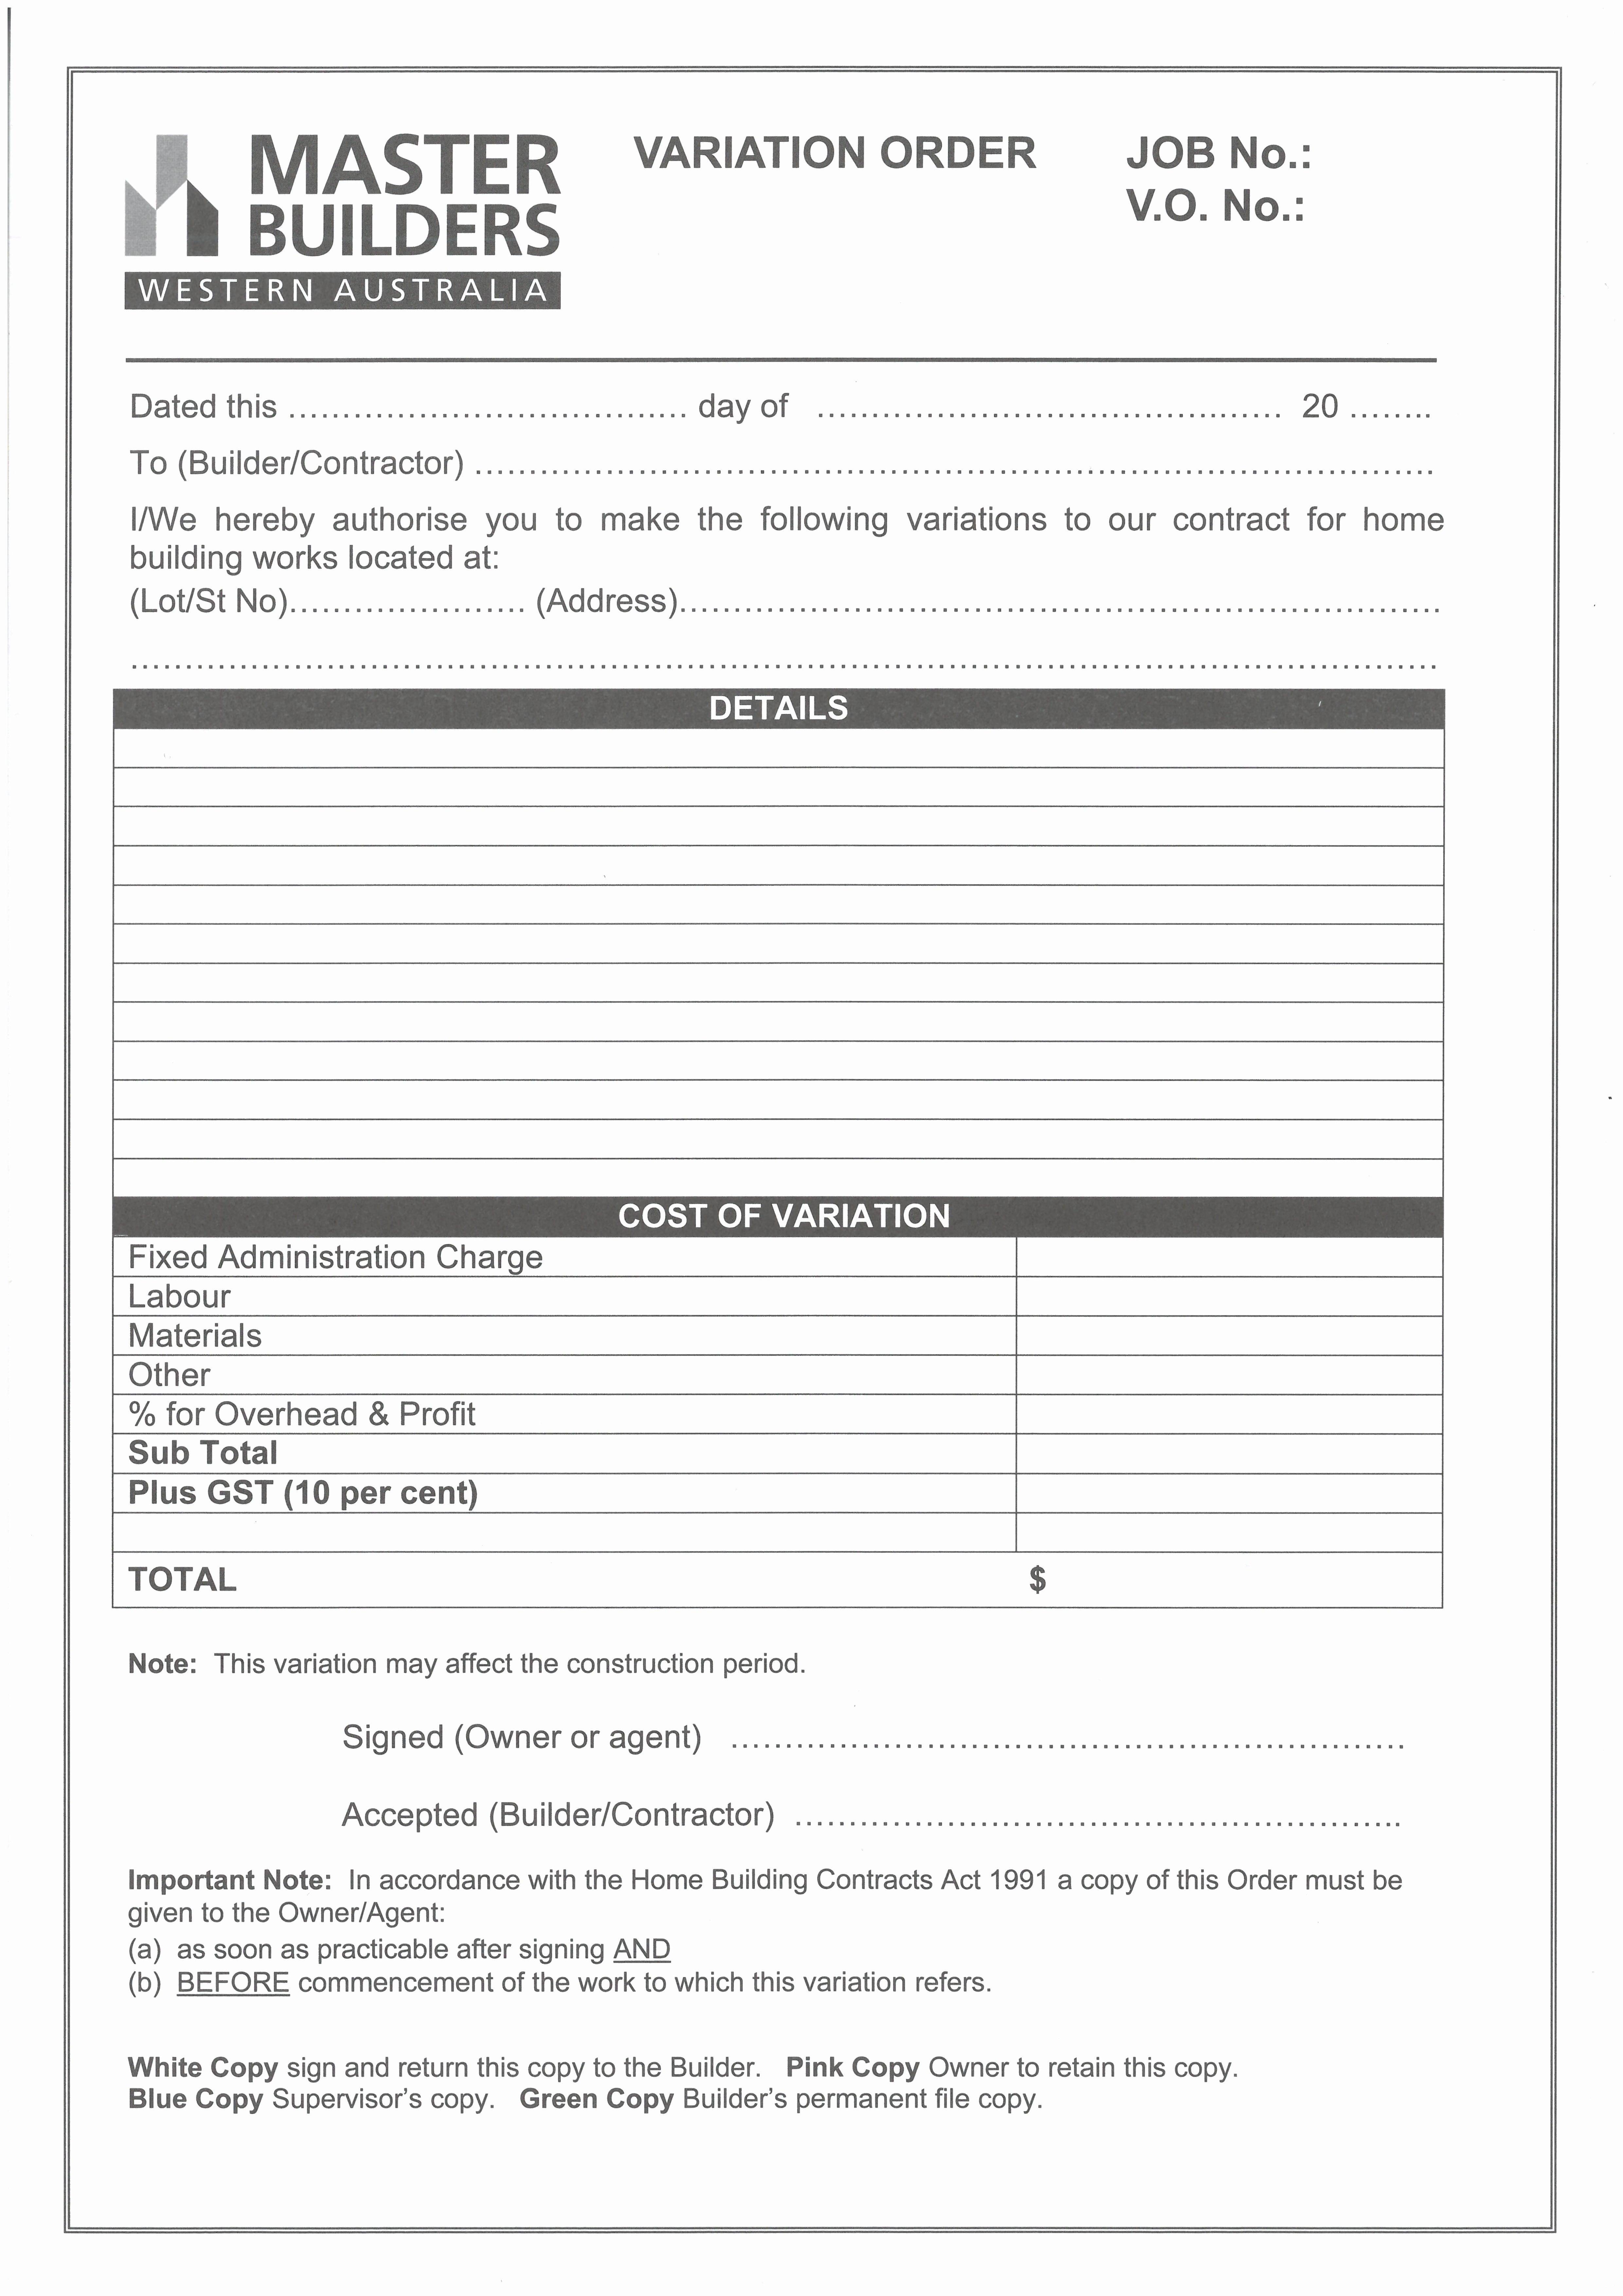 Home Construction Contract Template Fresh Variation order form Pad Master Builders Wamaster